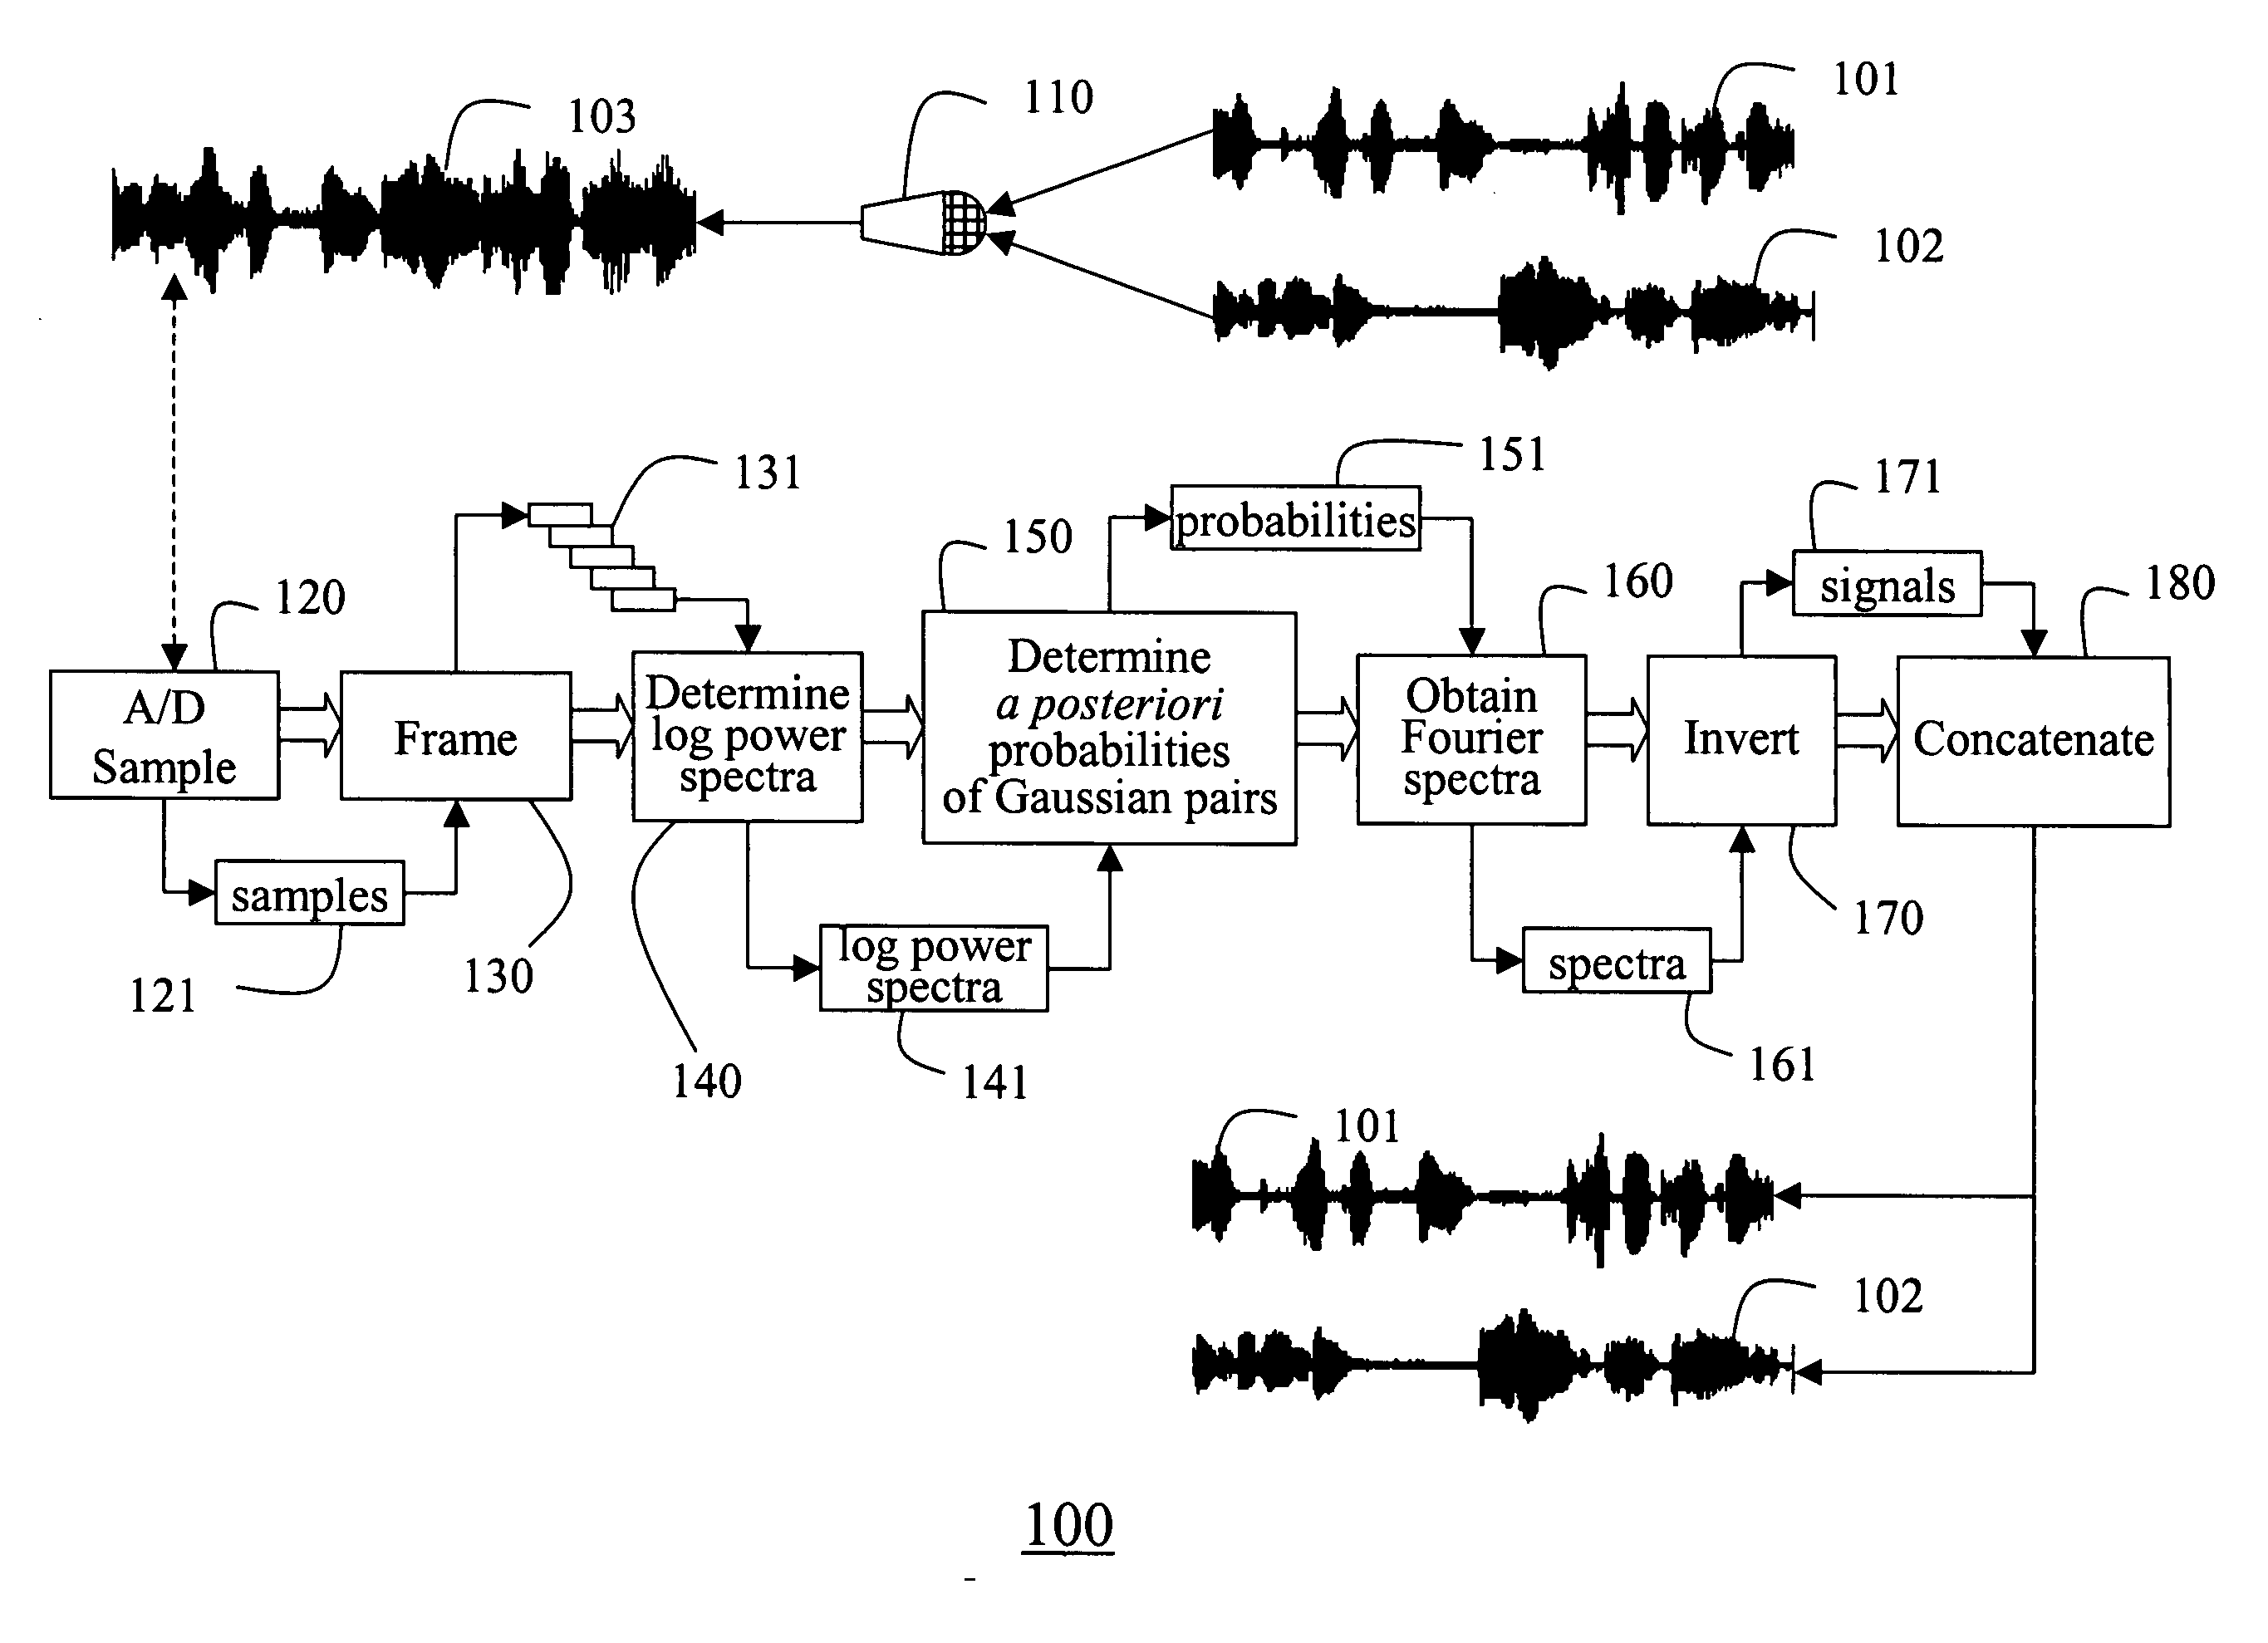 Separating multiple audio signals recorded as a single mixed signal